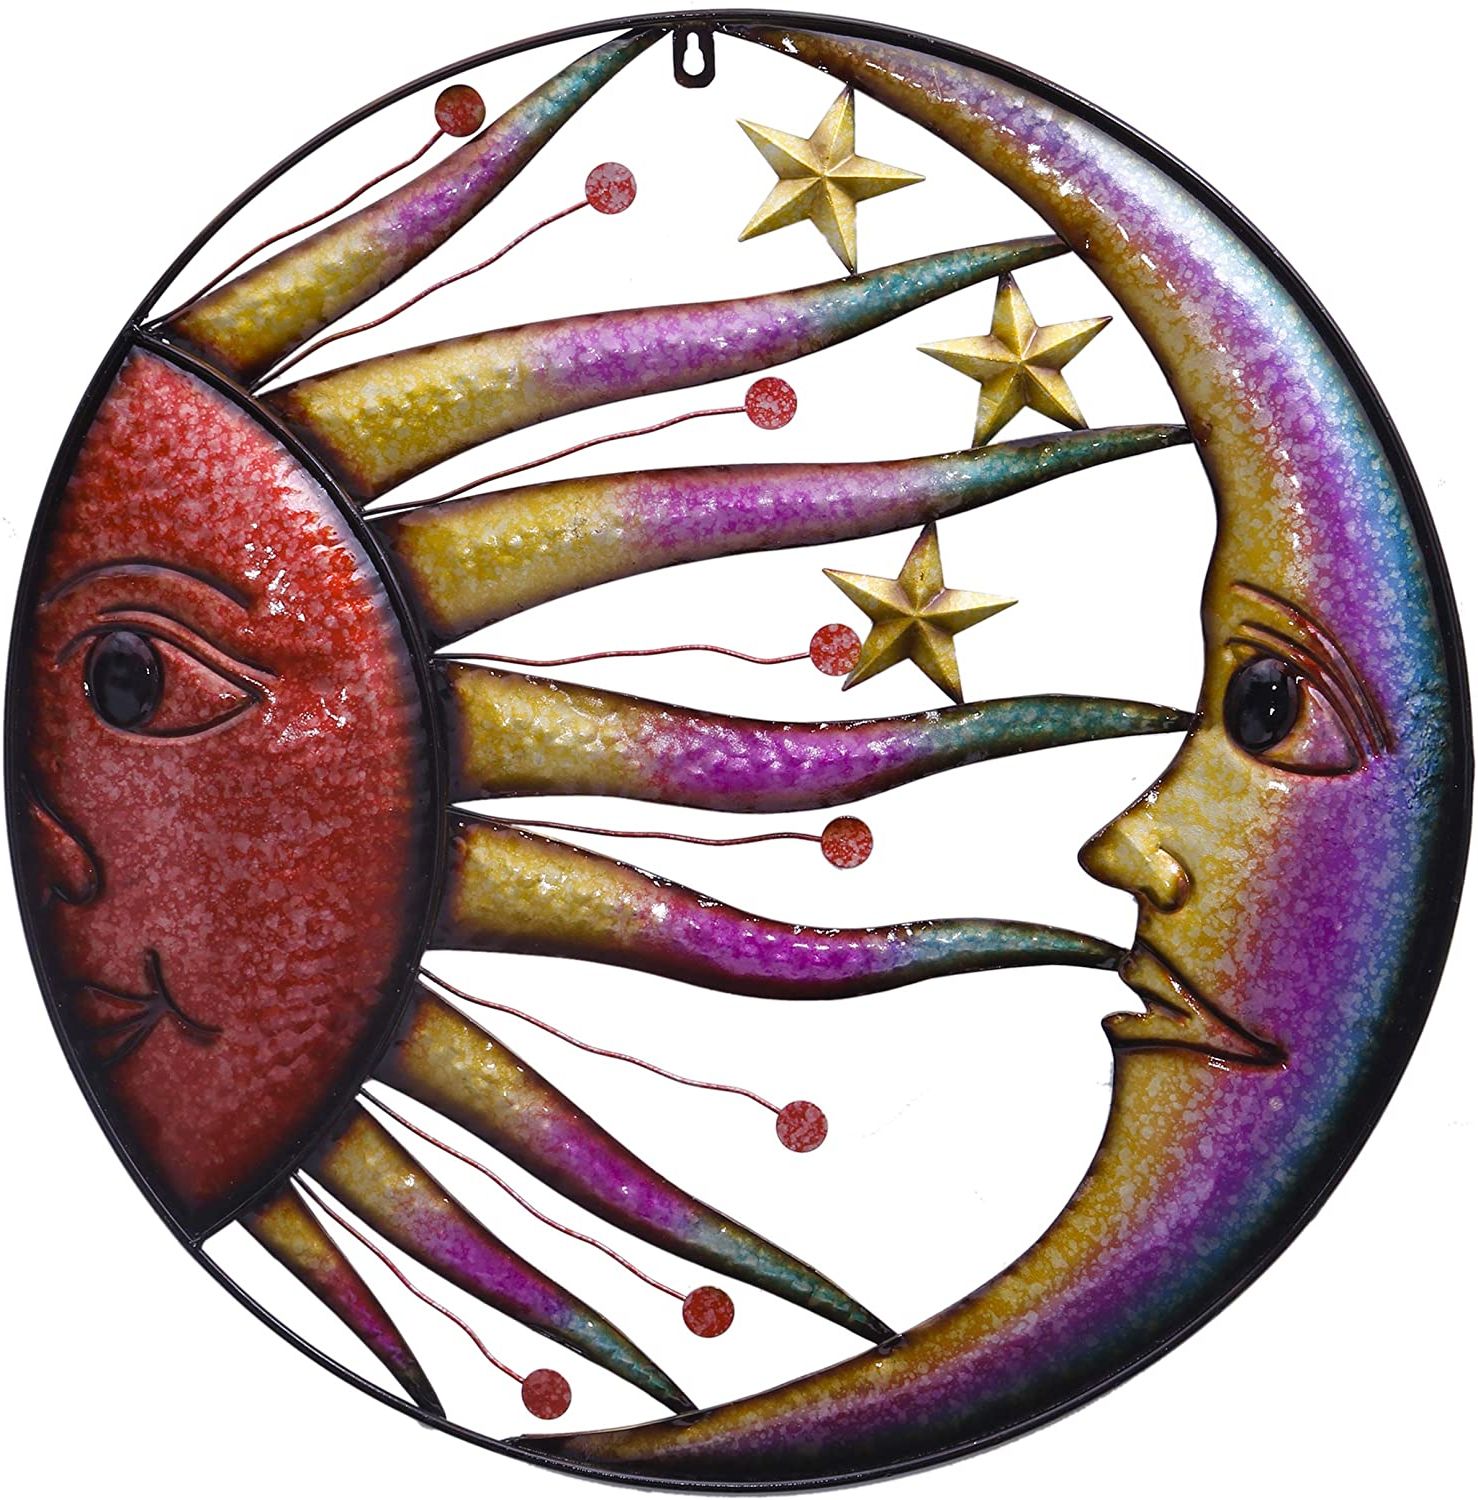 Most Recently Released Teresa's Collections 22.25 Inch Sun Moon And Stars Metal Wall Art Decor  Vivid Sun Face Celestial Wall Sculptures Hanging Décor For Indoor Outdoor  Home Within Blended Fabric Celestial Wall Hangings (set Of 3) (Photo 5 of 20)